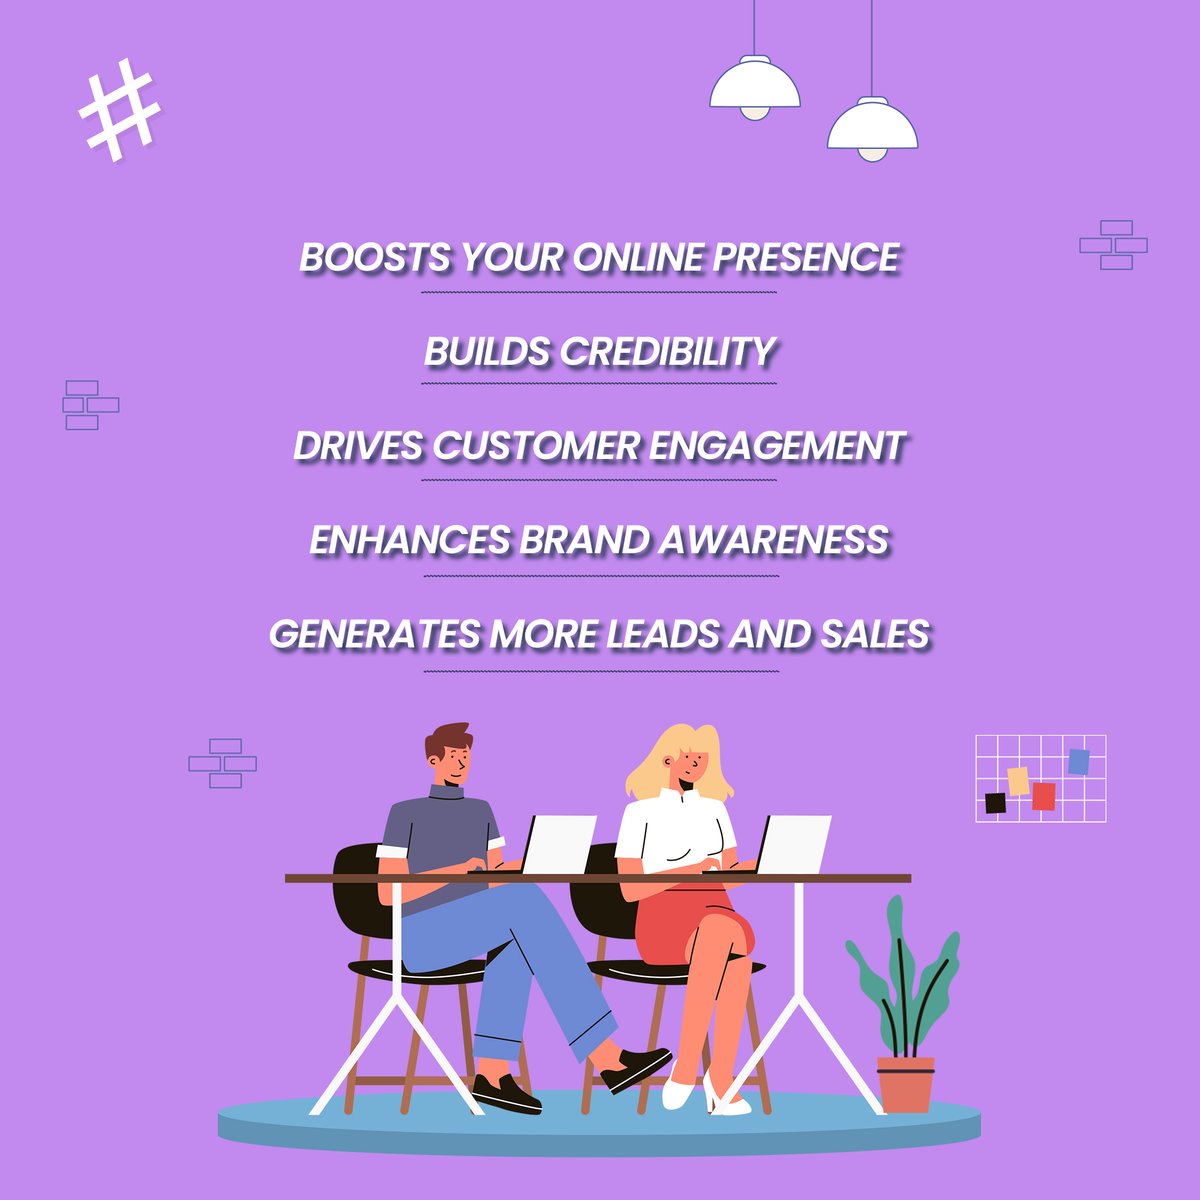 Don't Miss Out on These 5 Reasons Why Your Business Needs Website Development!
.
#OnlinePresenceMatters #BuildYourBrand #TrustAndCredibility#BrandIdentity #DigitalMarketingSuccess #WebsiteDevelopement
#SocialAgent #BricstalGroup #LetusbeyourSocialAgent